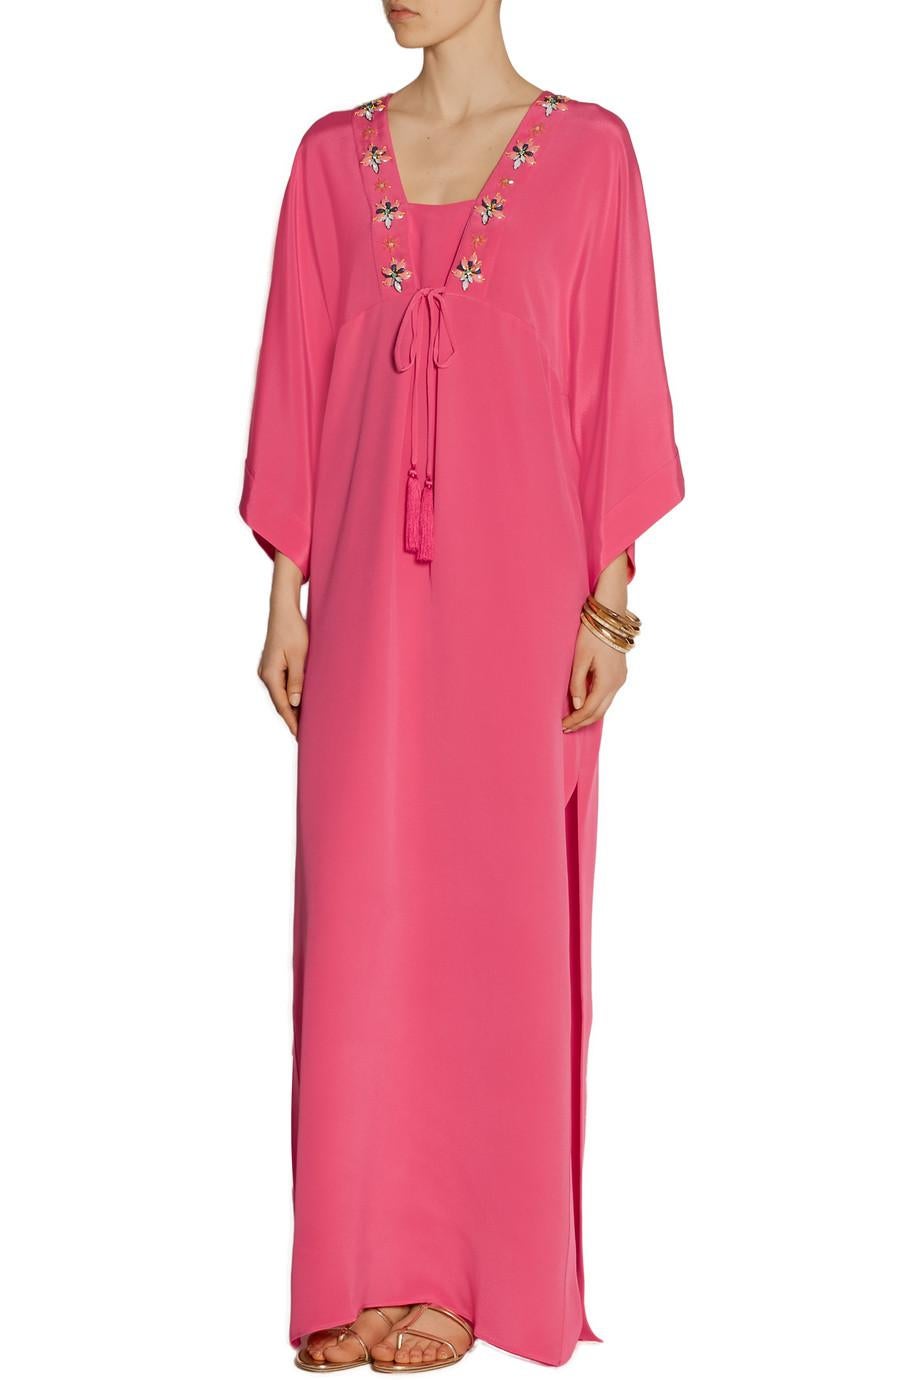 NEW Emilio Pucci Silk Cady Embroidered Kaftan Maxi Dress Evening Gown 42 For Sale 7